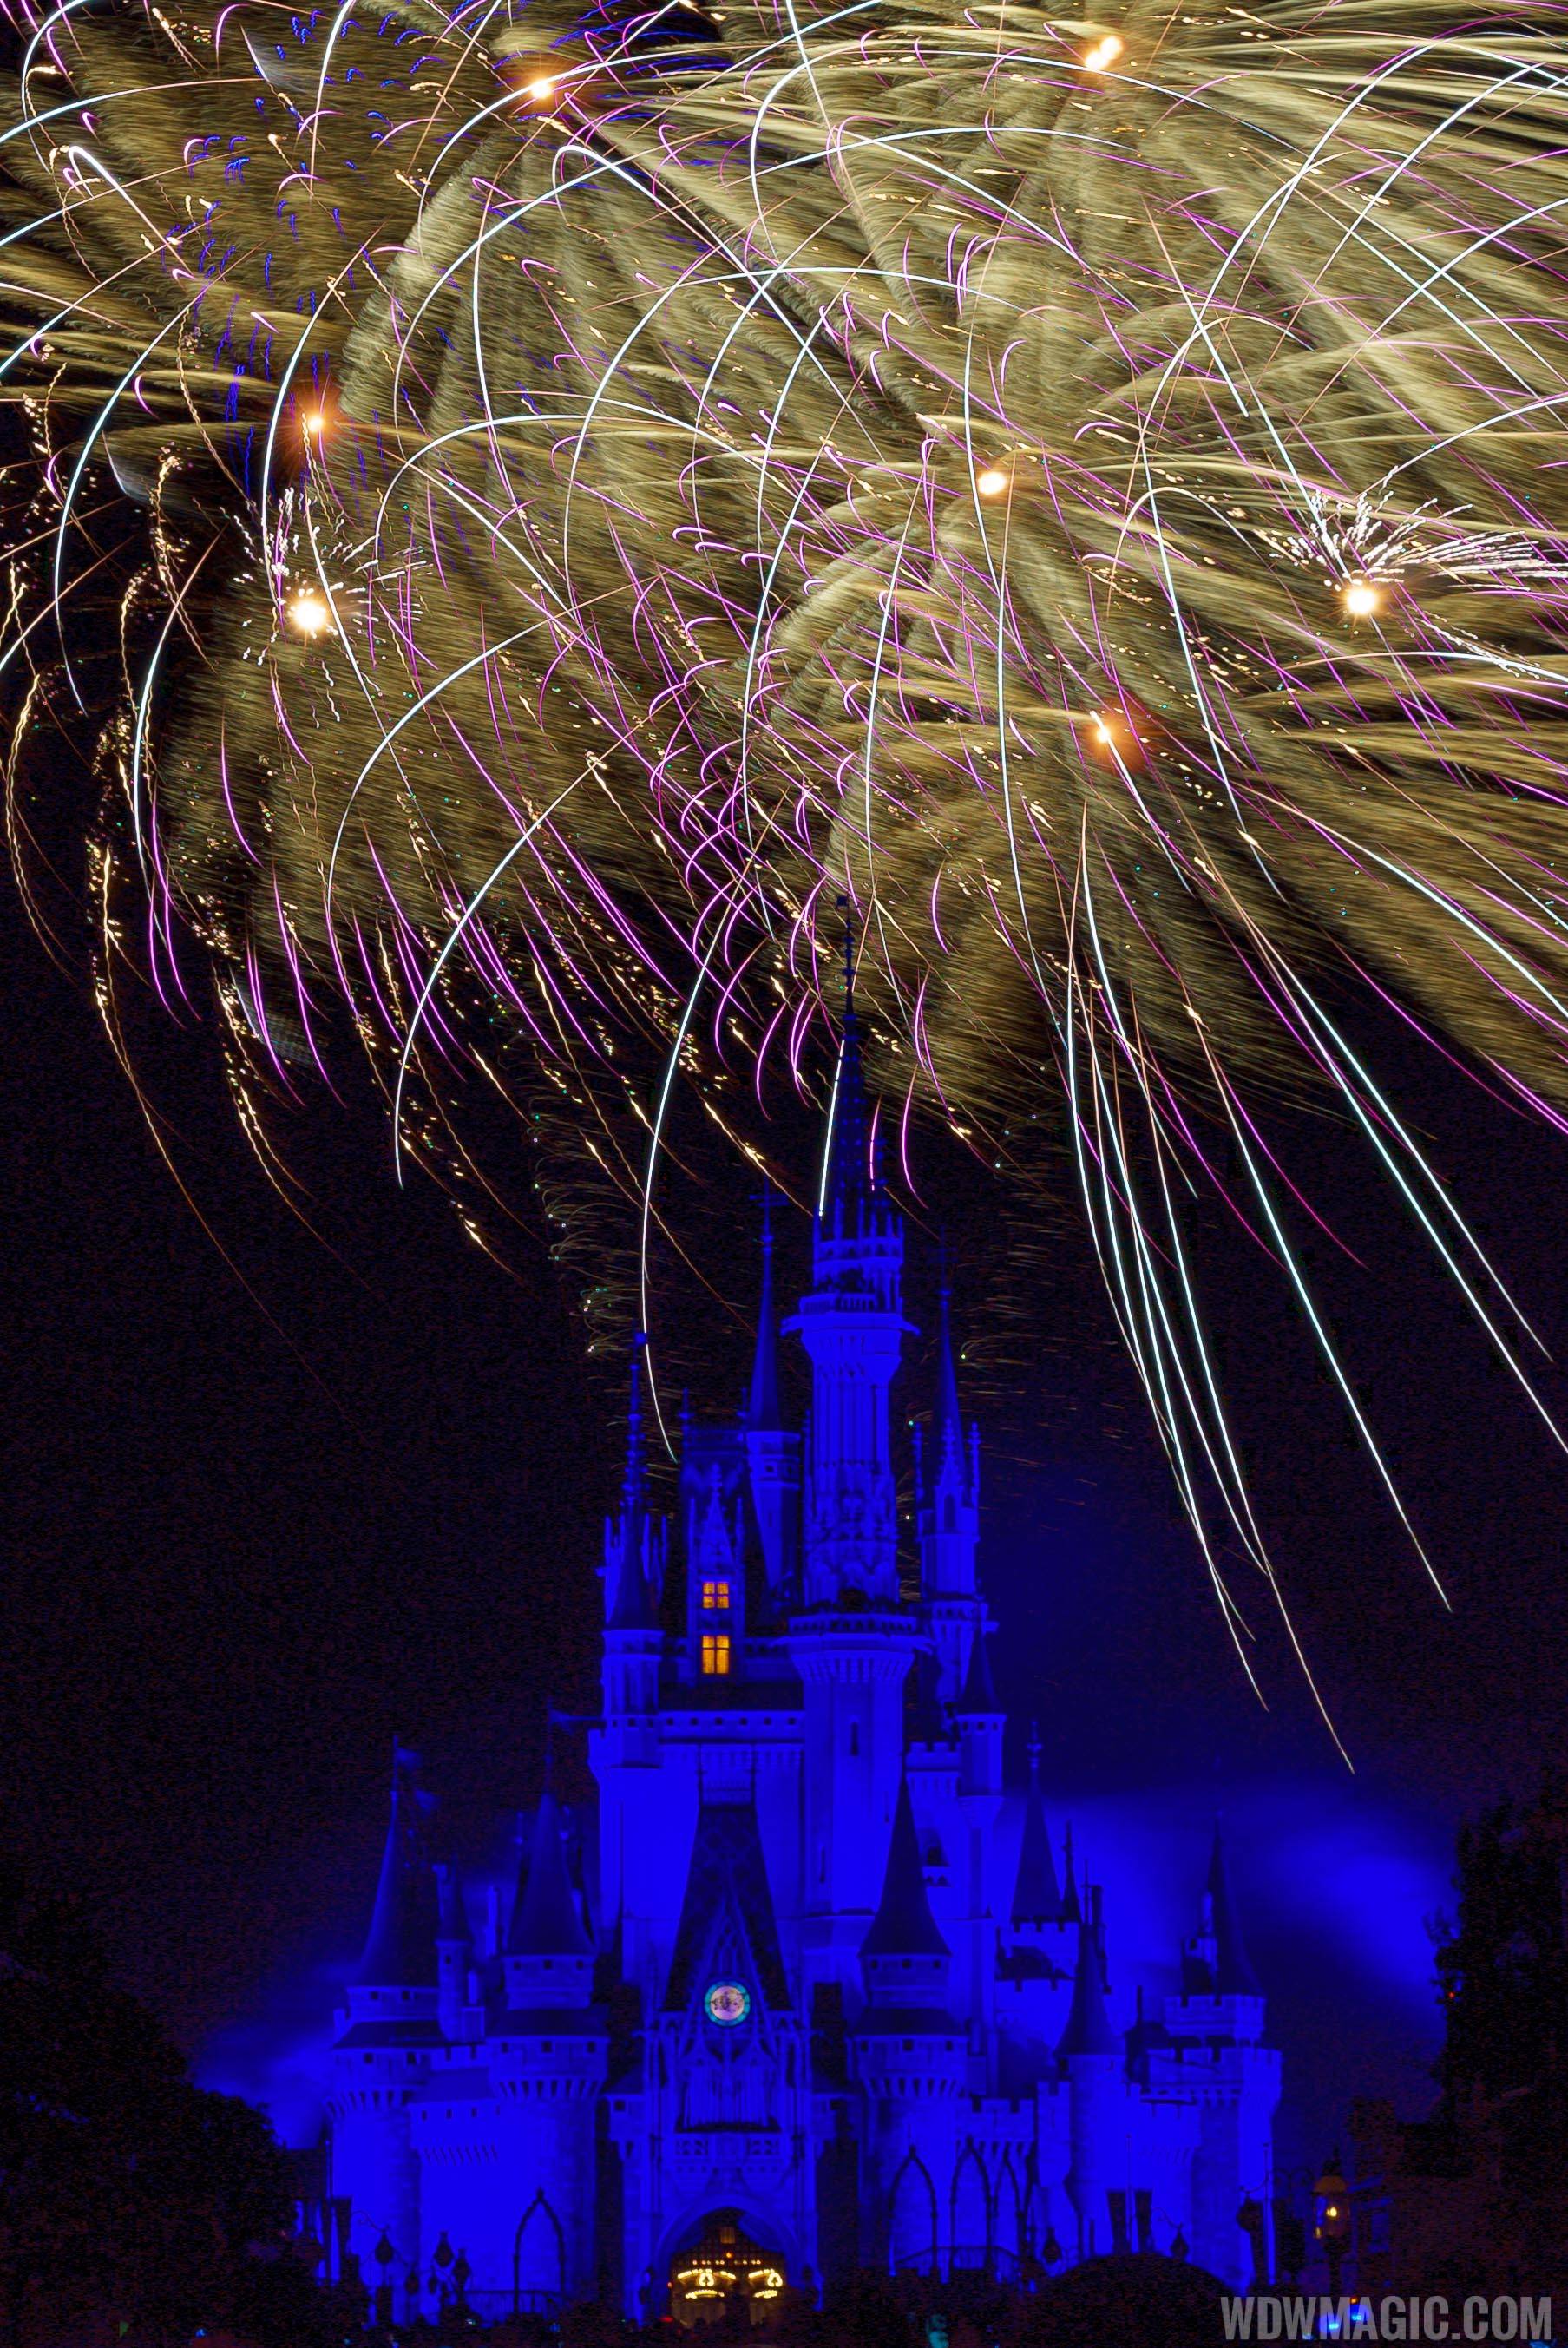 Wishes show